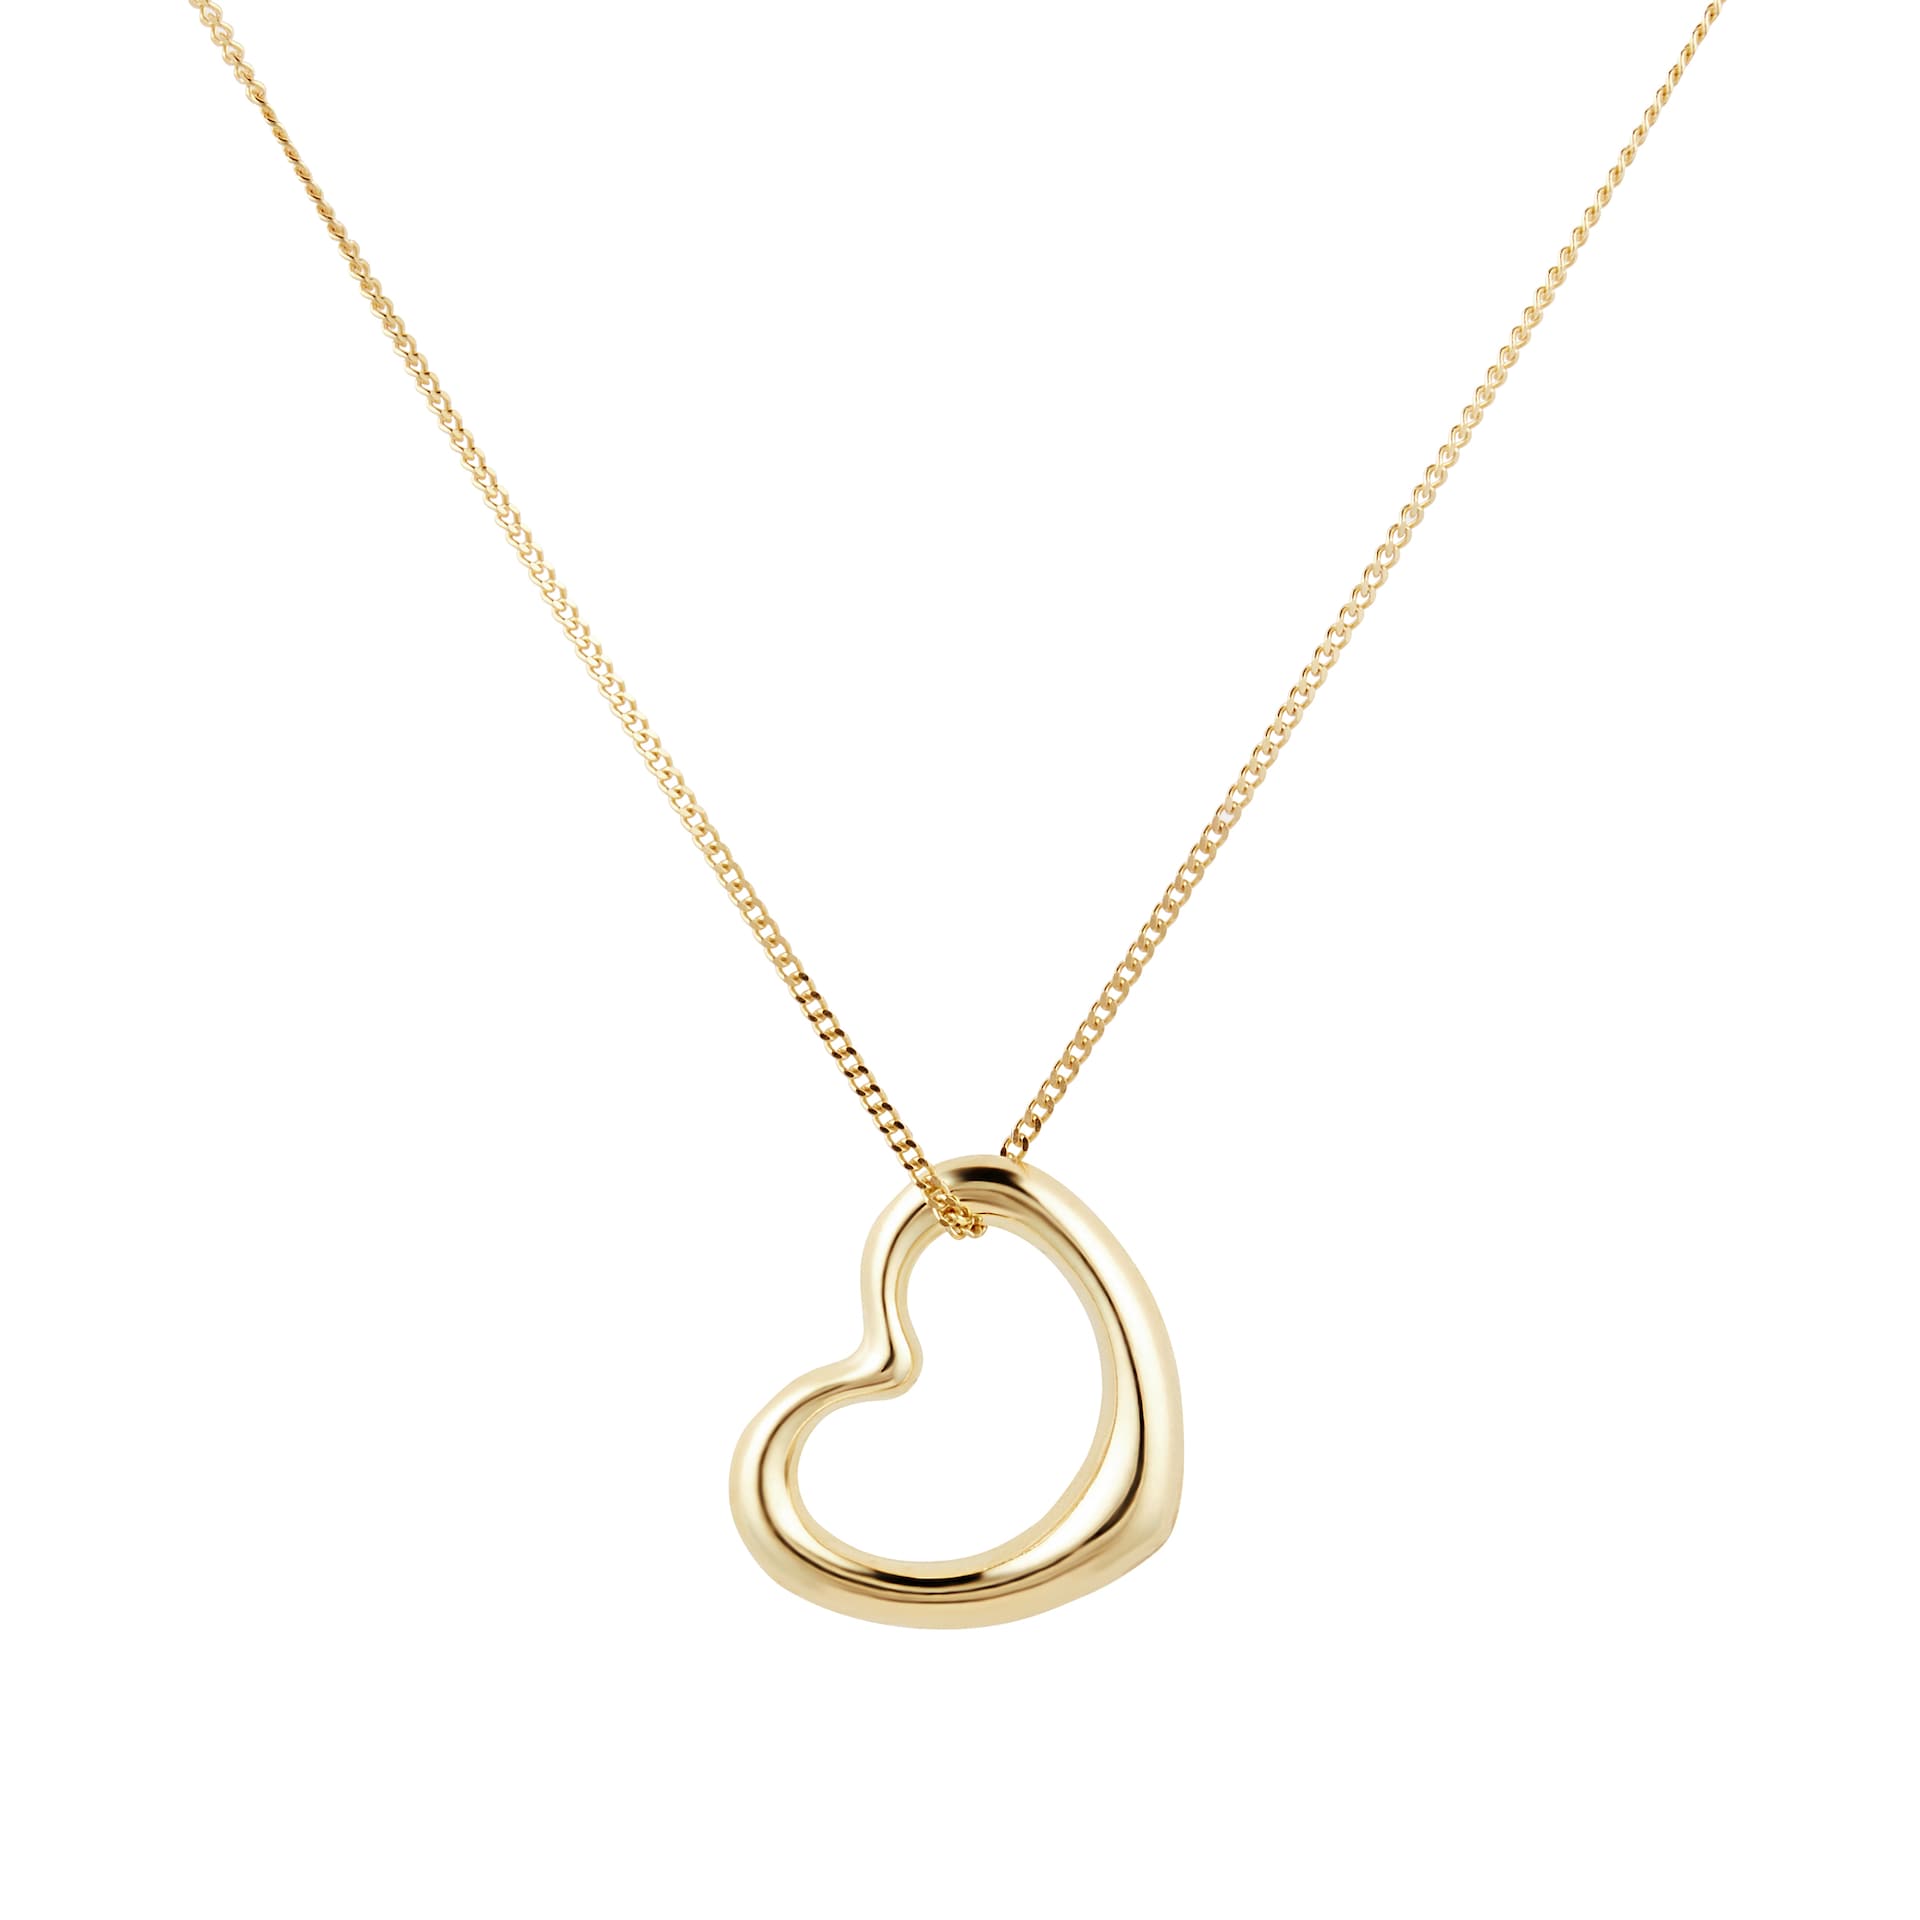 Gifts For Her | Gifts | Goldsmiths